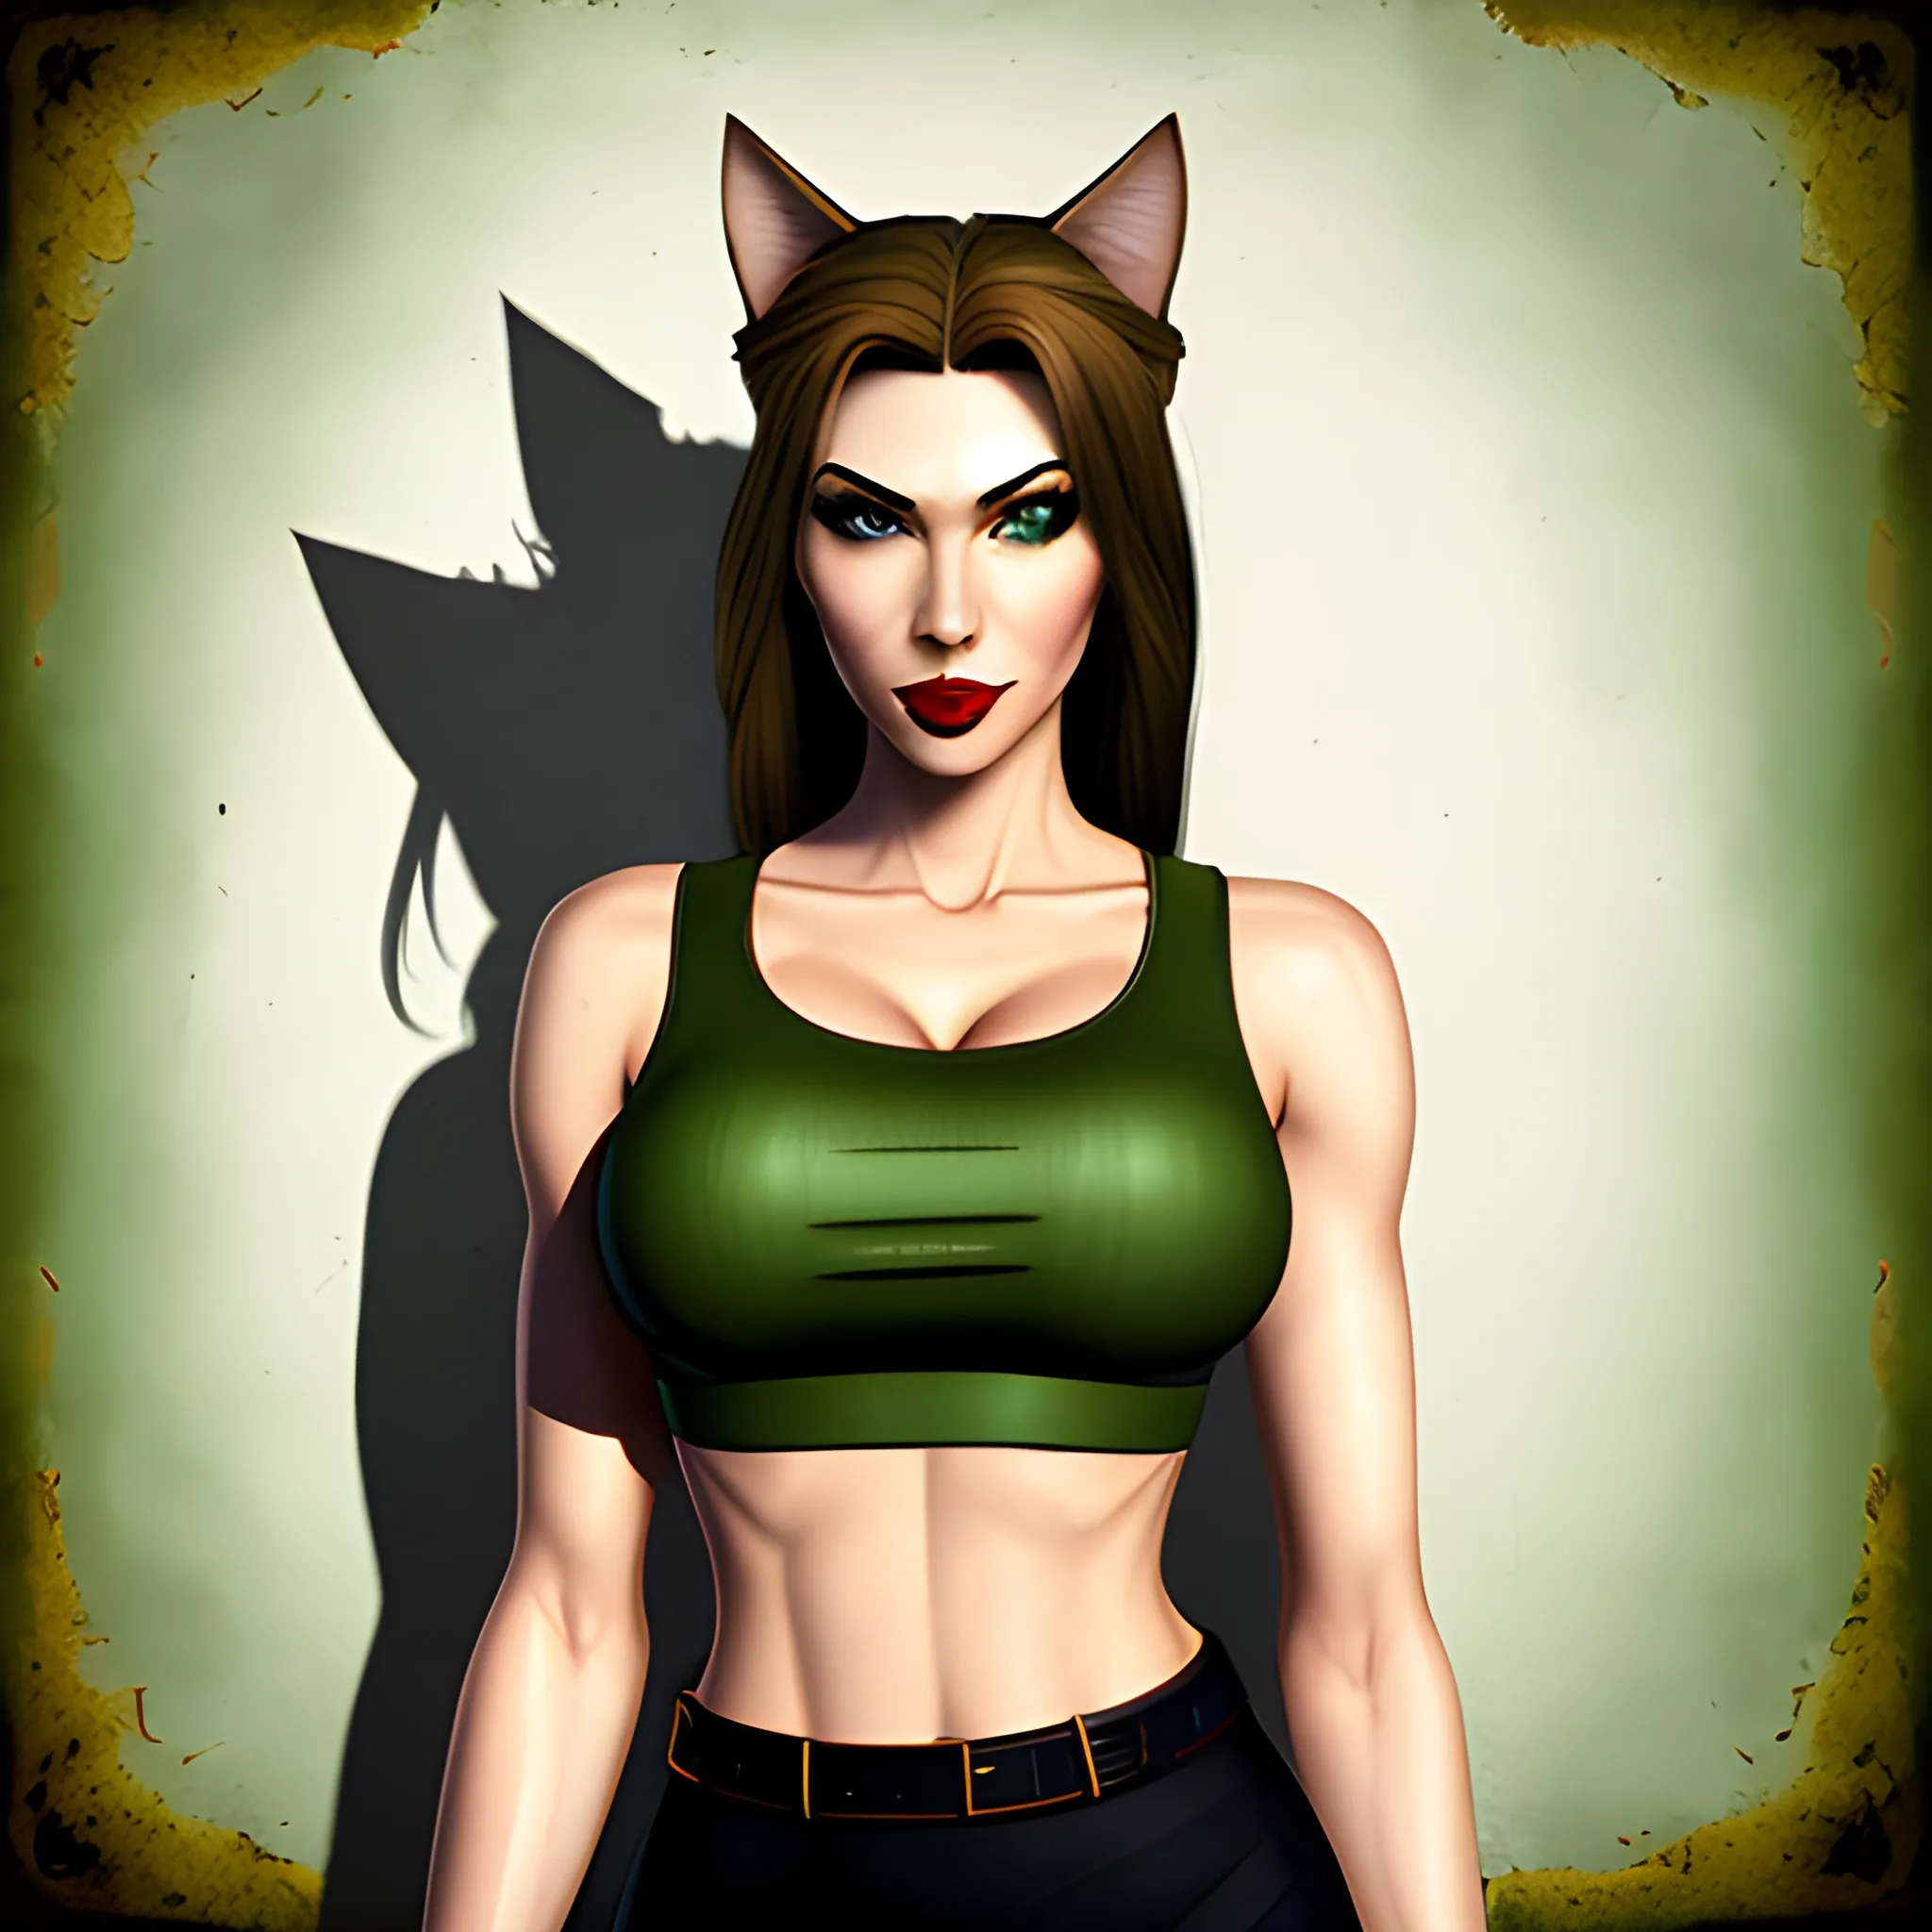 In the style of Fallout 1, (masterpiece), (portrait photography), (portrait of an adult Caucasian female), catgirl, cat ears, long hairstyle, long brown hair, green eyes, white tanktop, exposed midriff, full-body portrait